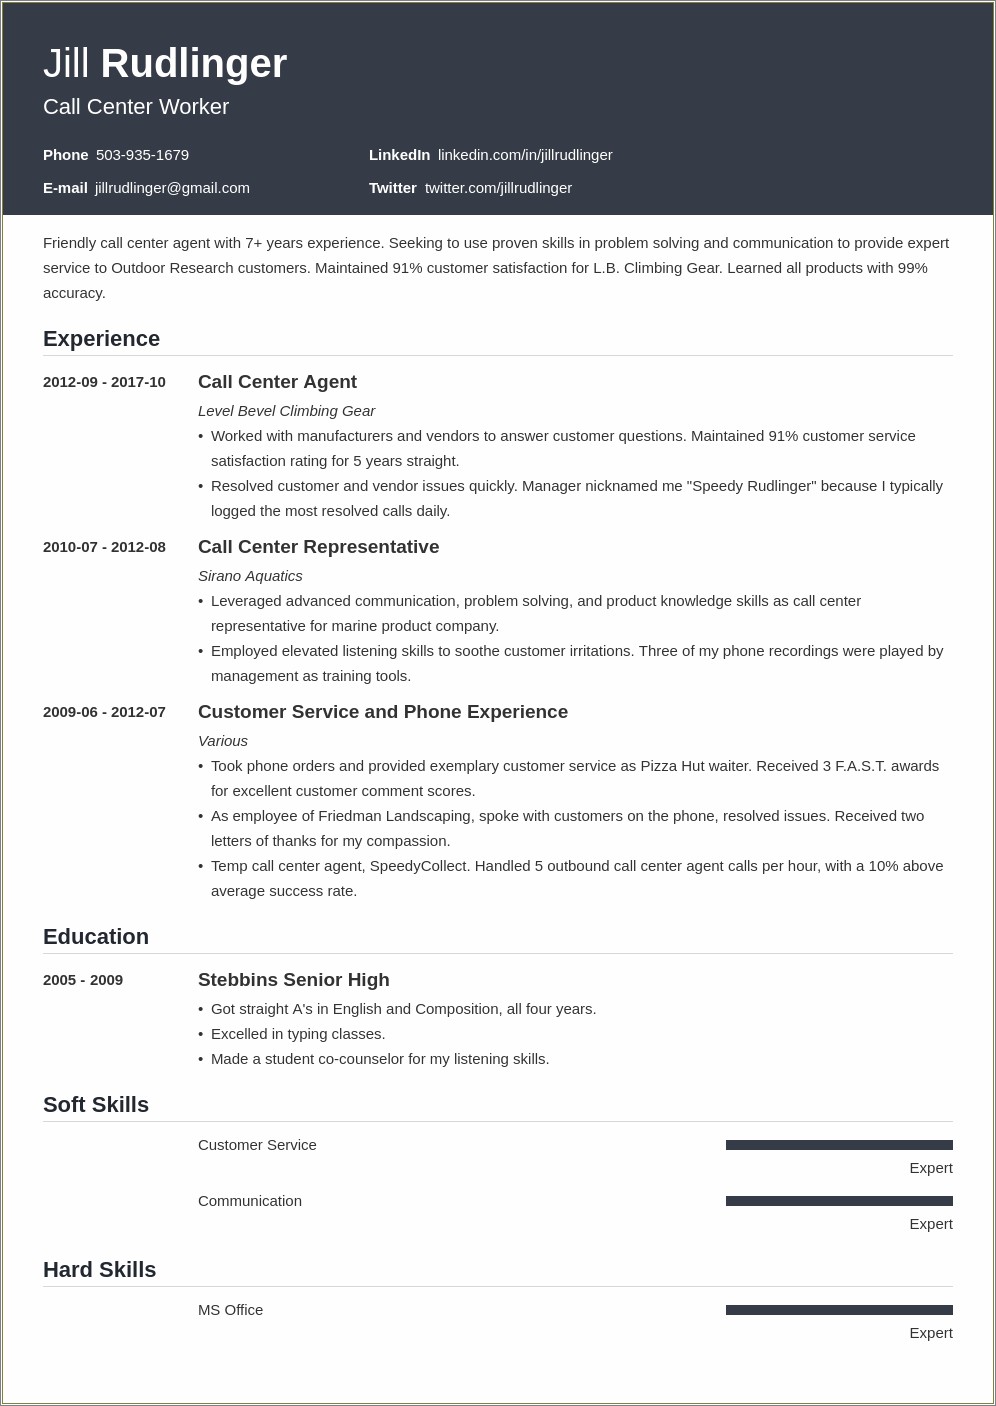 Management Resume Examples 2017 Call Center Managenment